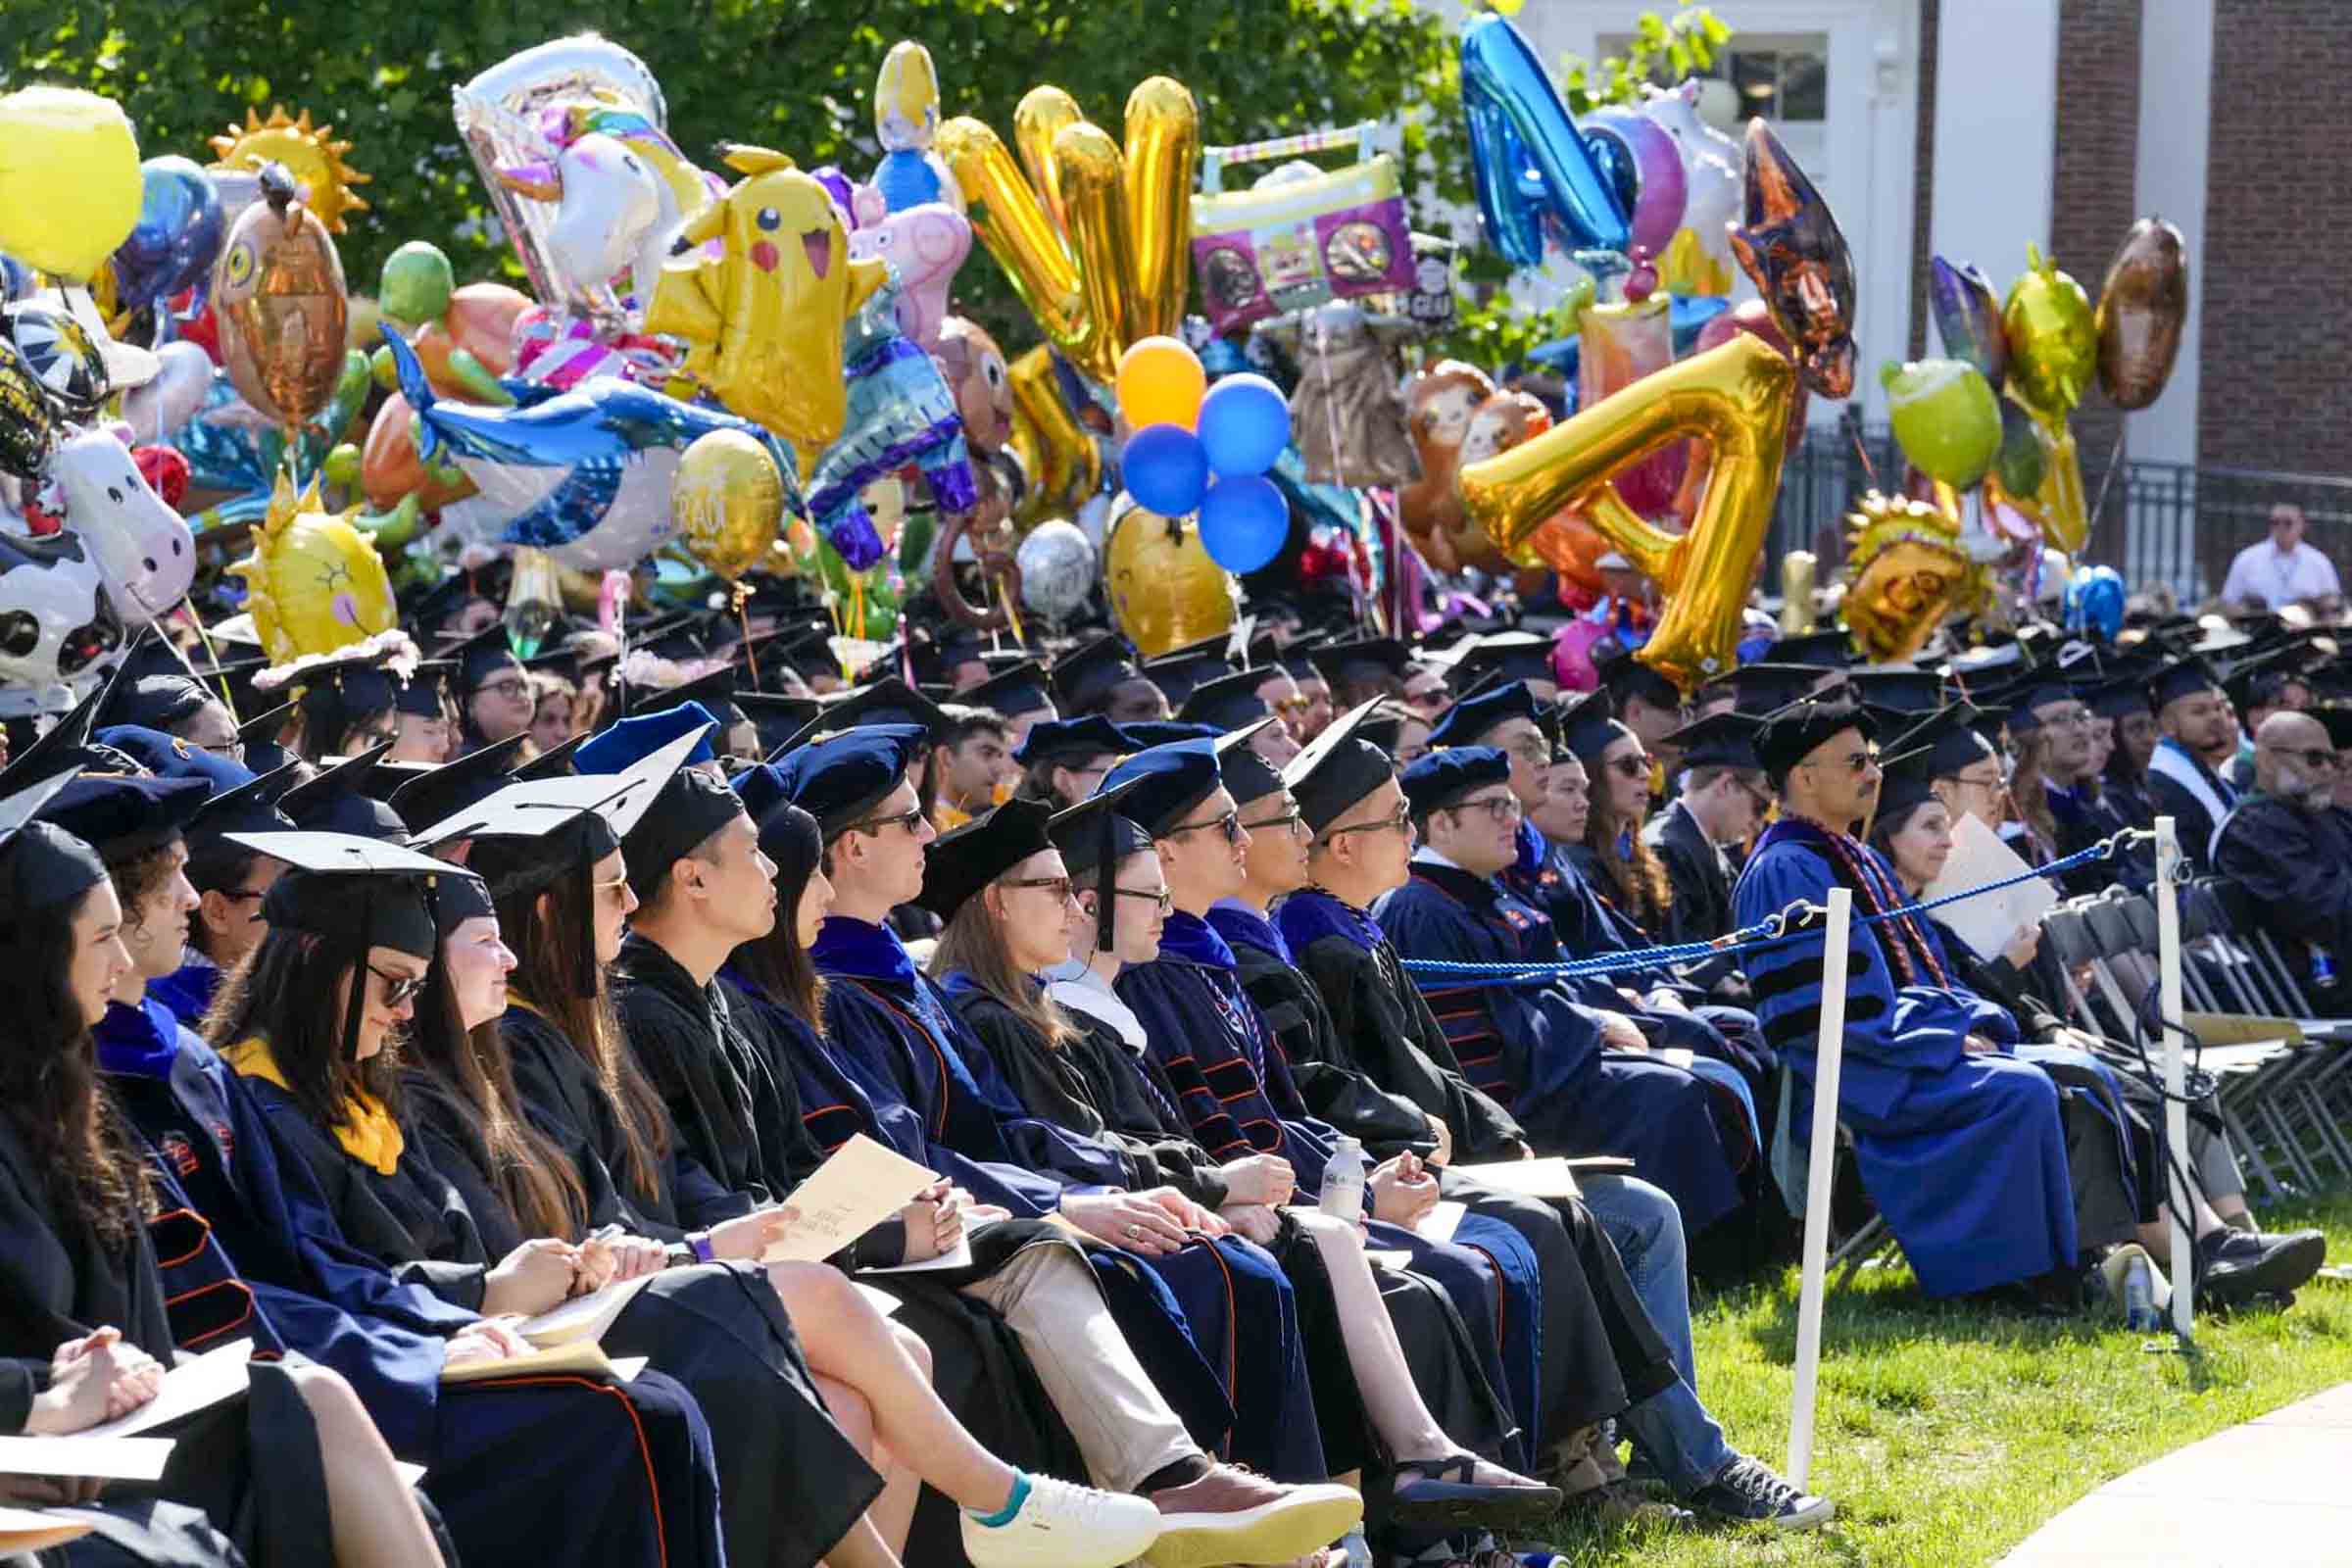 A happy group of soon to be A&S graduates with balloons sitting waiting for the ceremony to begin